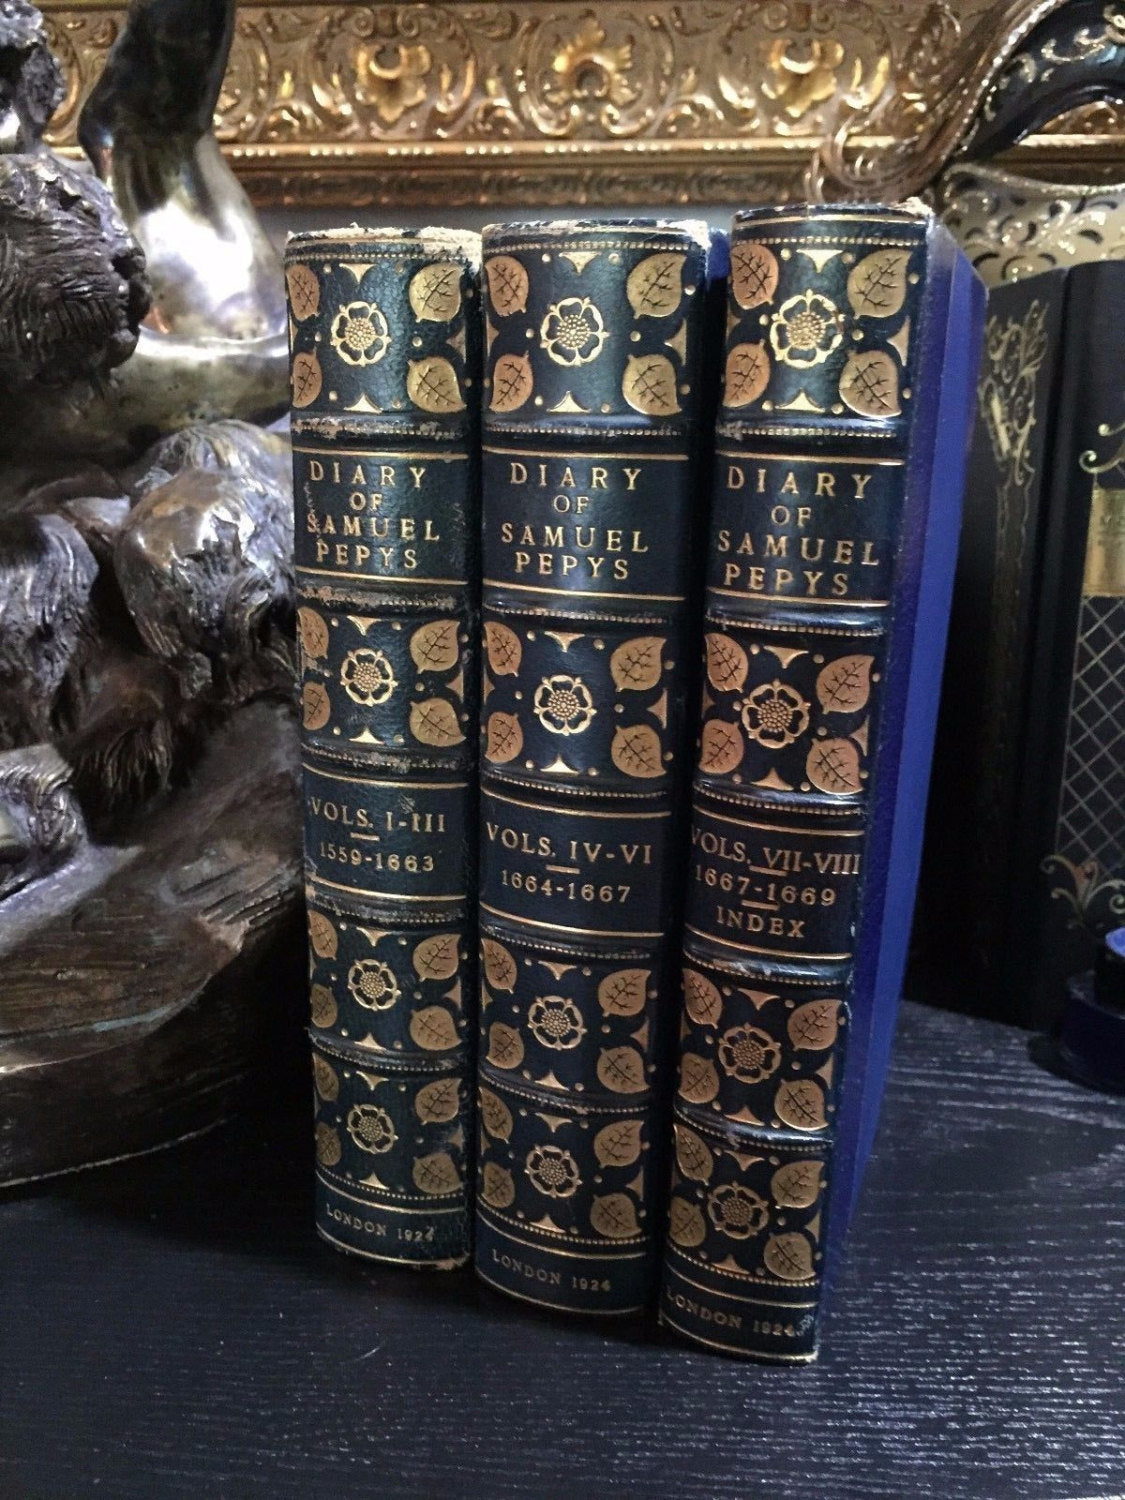 Diary of Samuel Pepys, Complete Vol I-VIII, Edited by Wheatley, Leather, 1924